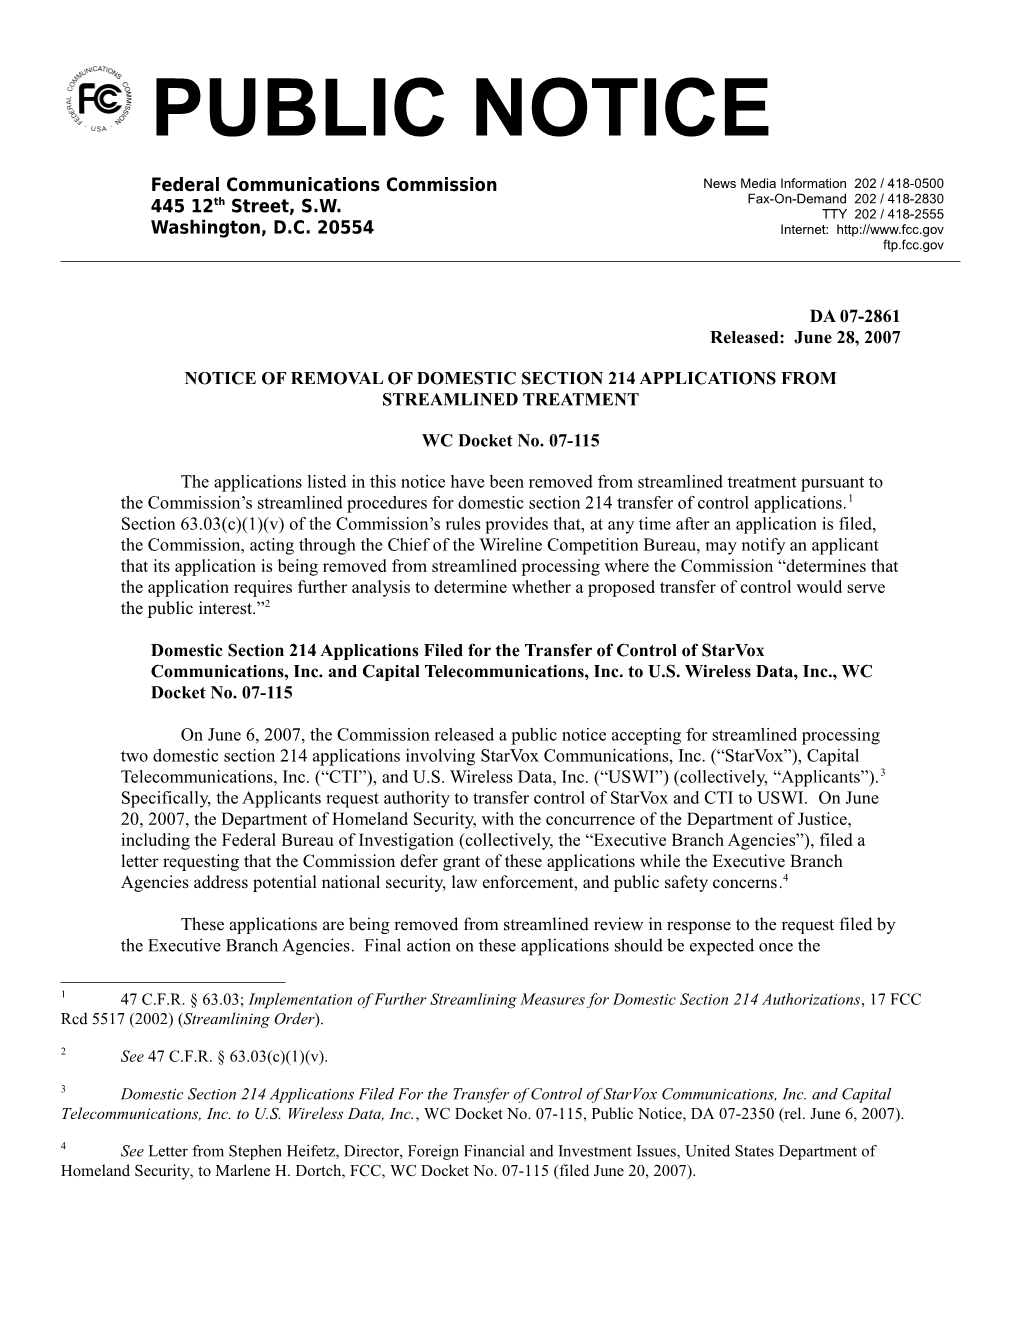 Notice of Removal of Domestic Section 214 Applications from Streamlined Treatment